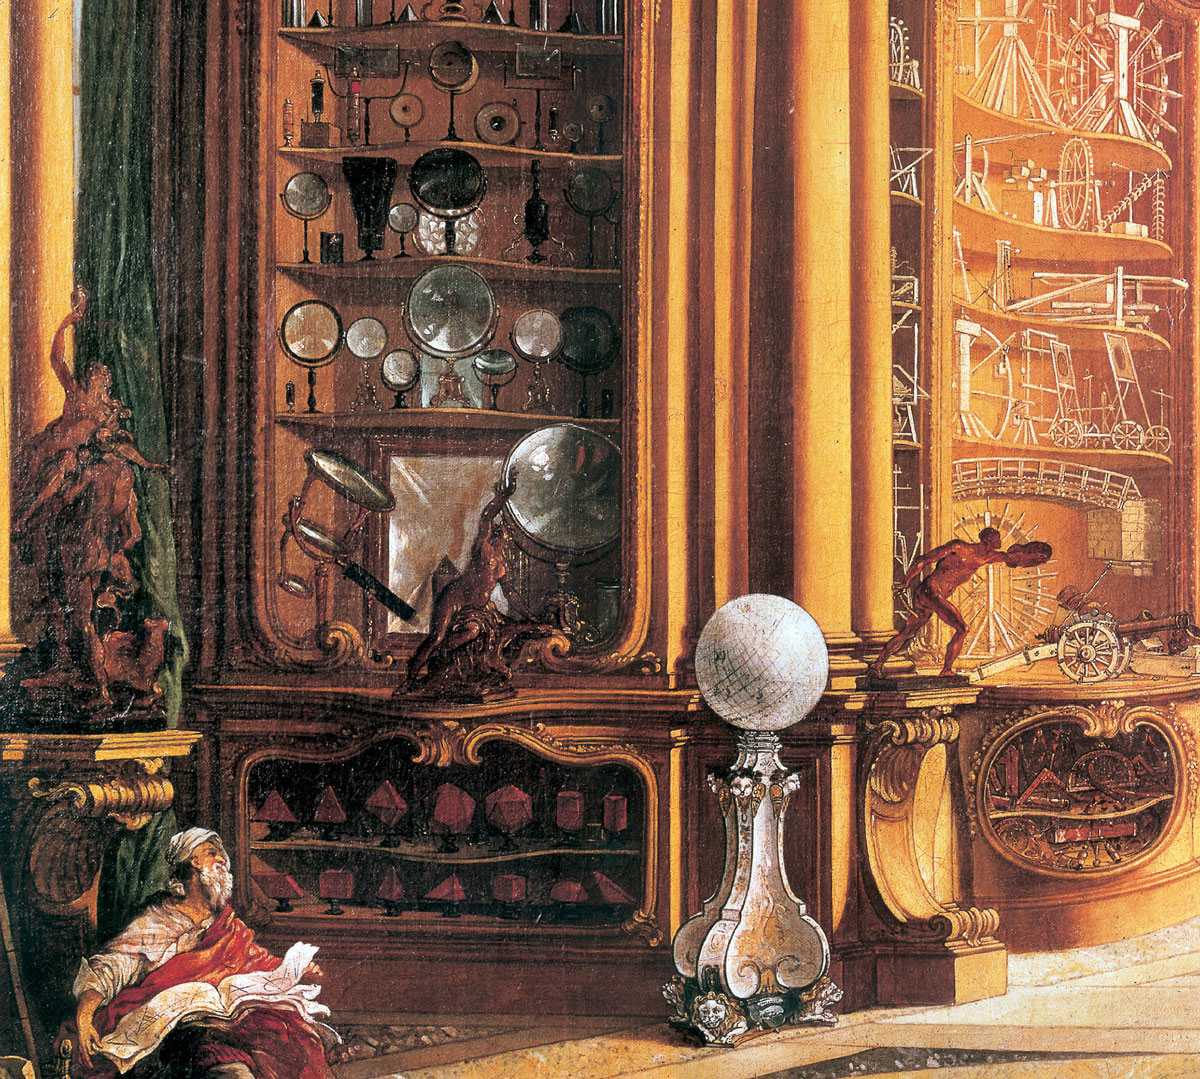 A detail from Jacques de LaJoüe’s 1734 painting for the Cabinet Bonnier, located above the door leading to the Second Cabinet of Natural History.